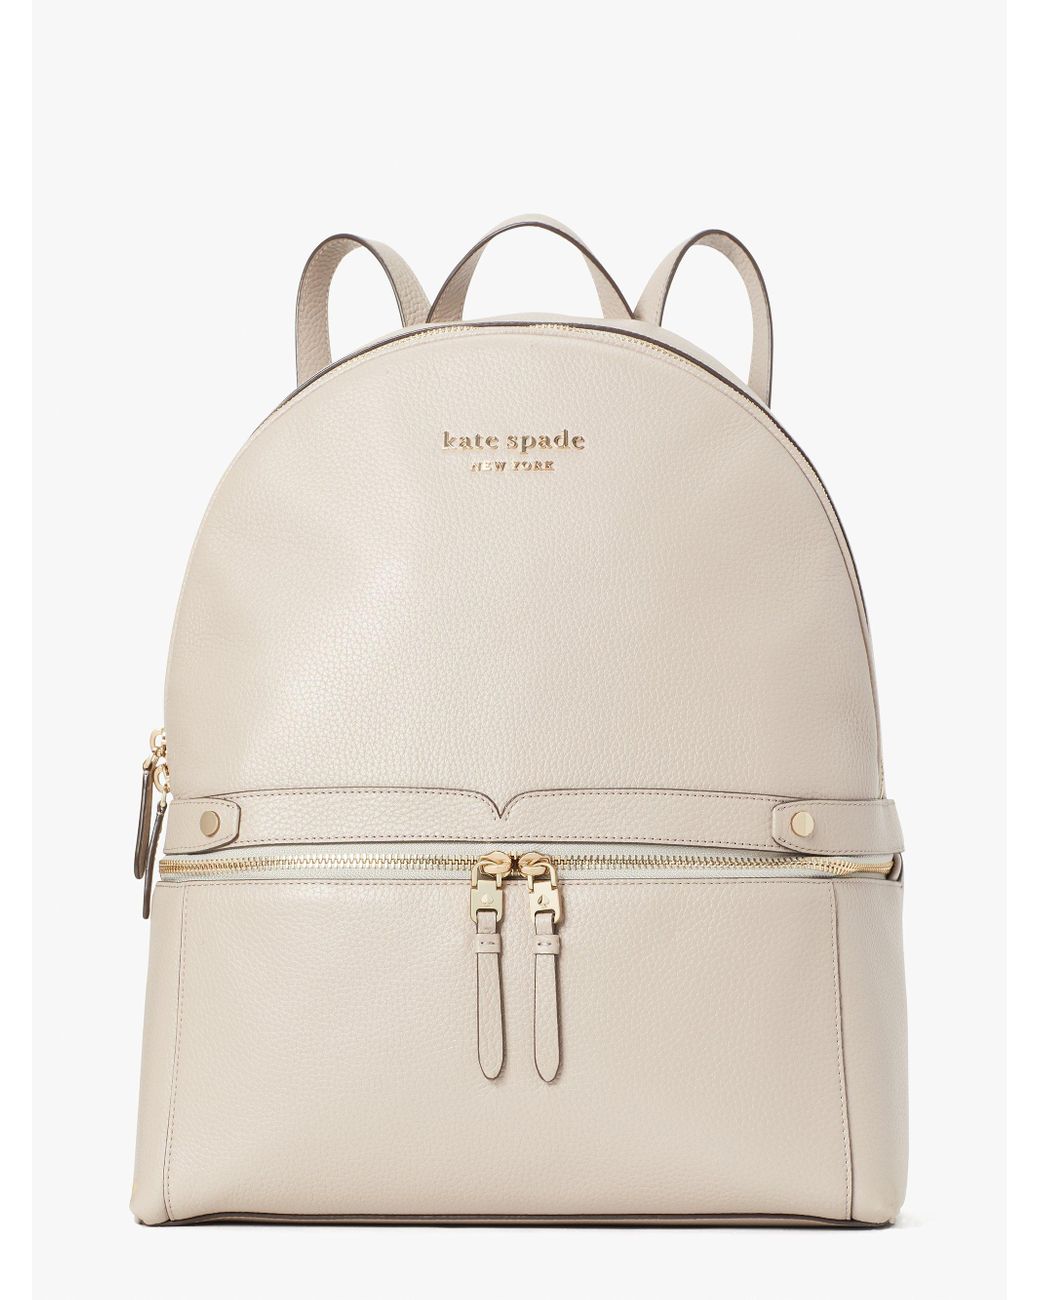 Kate Spade Leather Day Pack Large Backpack in Natural - Lyst